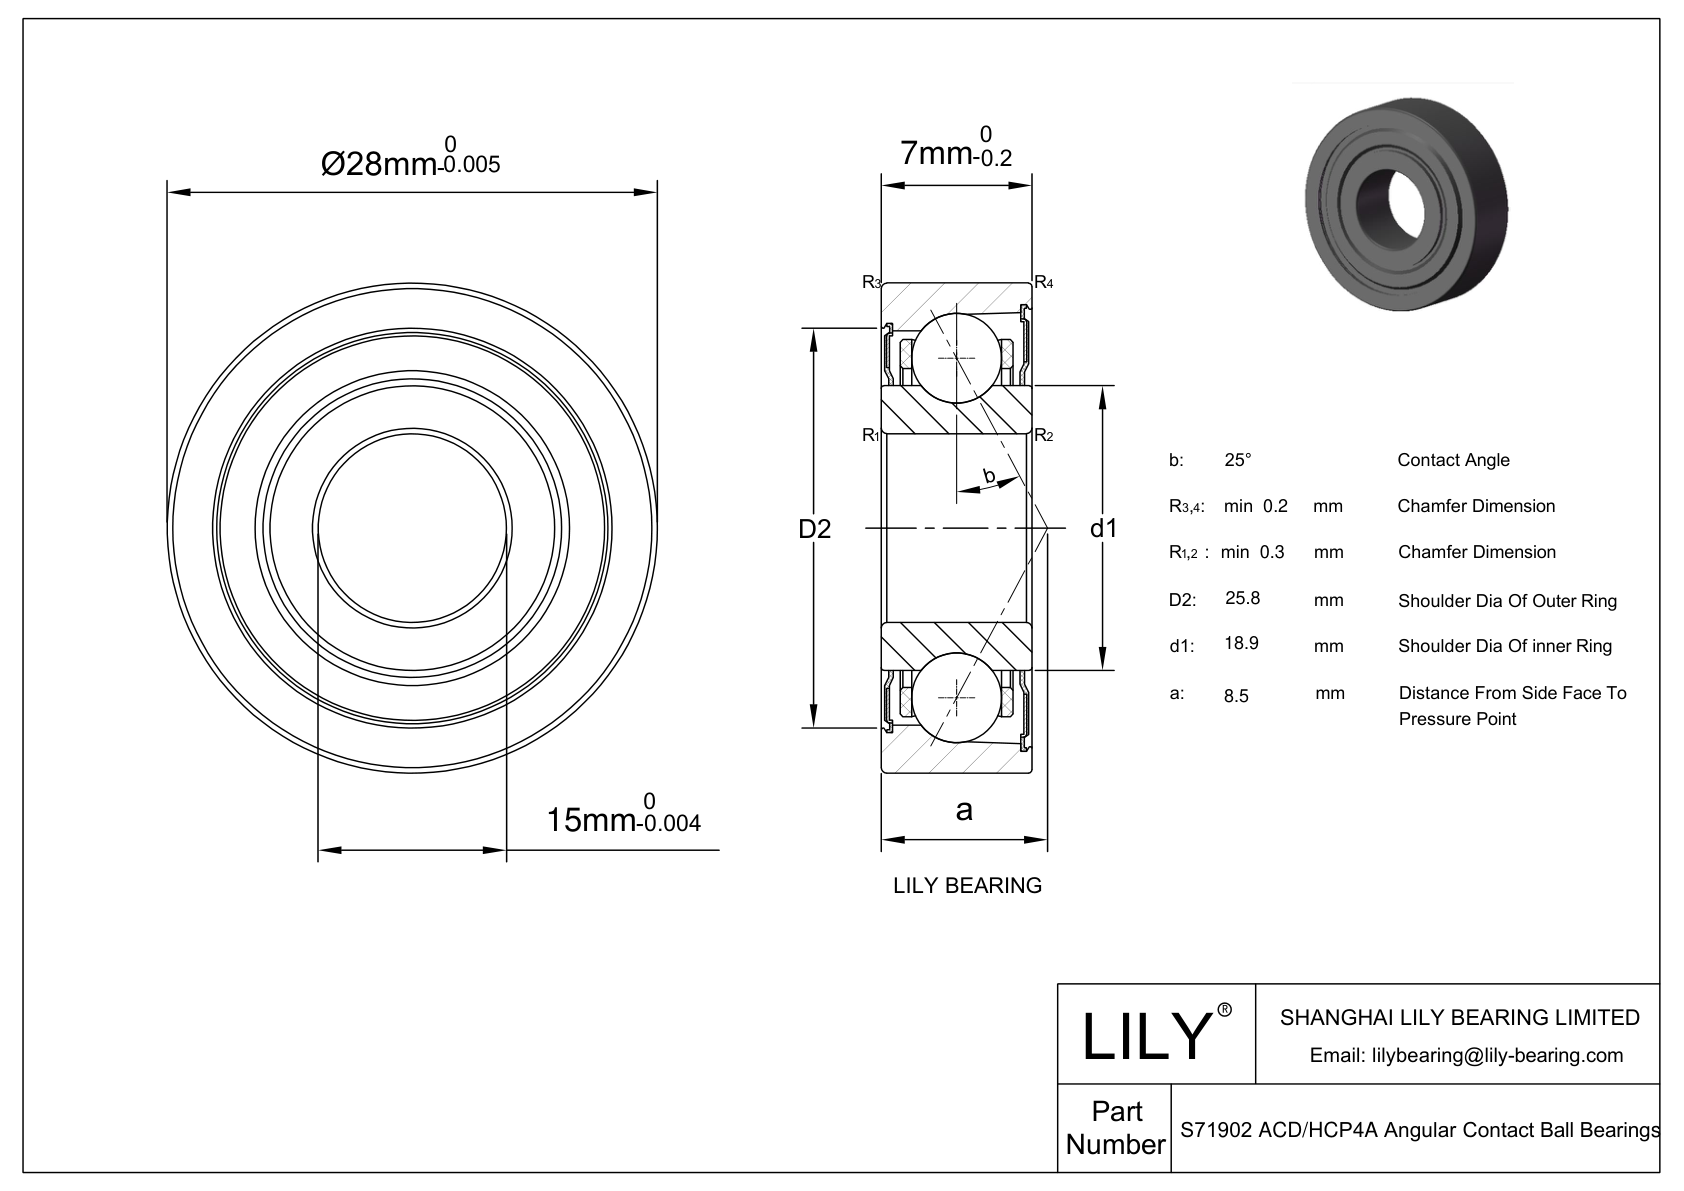 S71902 ACD/HCP4A Super Precision Angular Contact Ball Bearings cad drawing